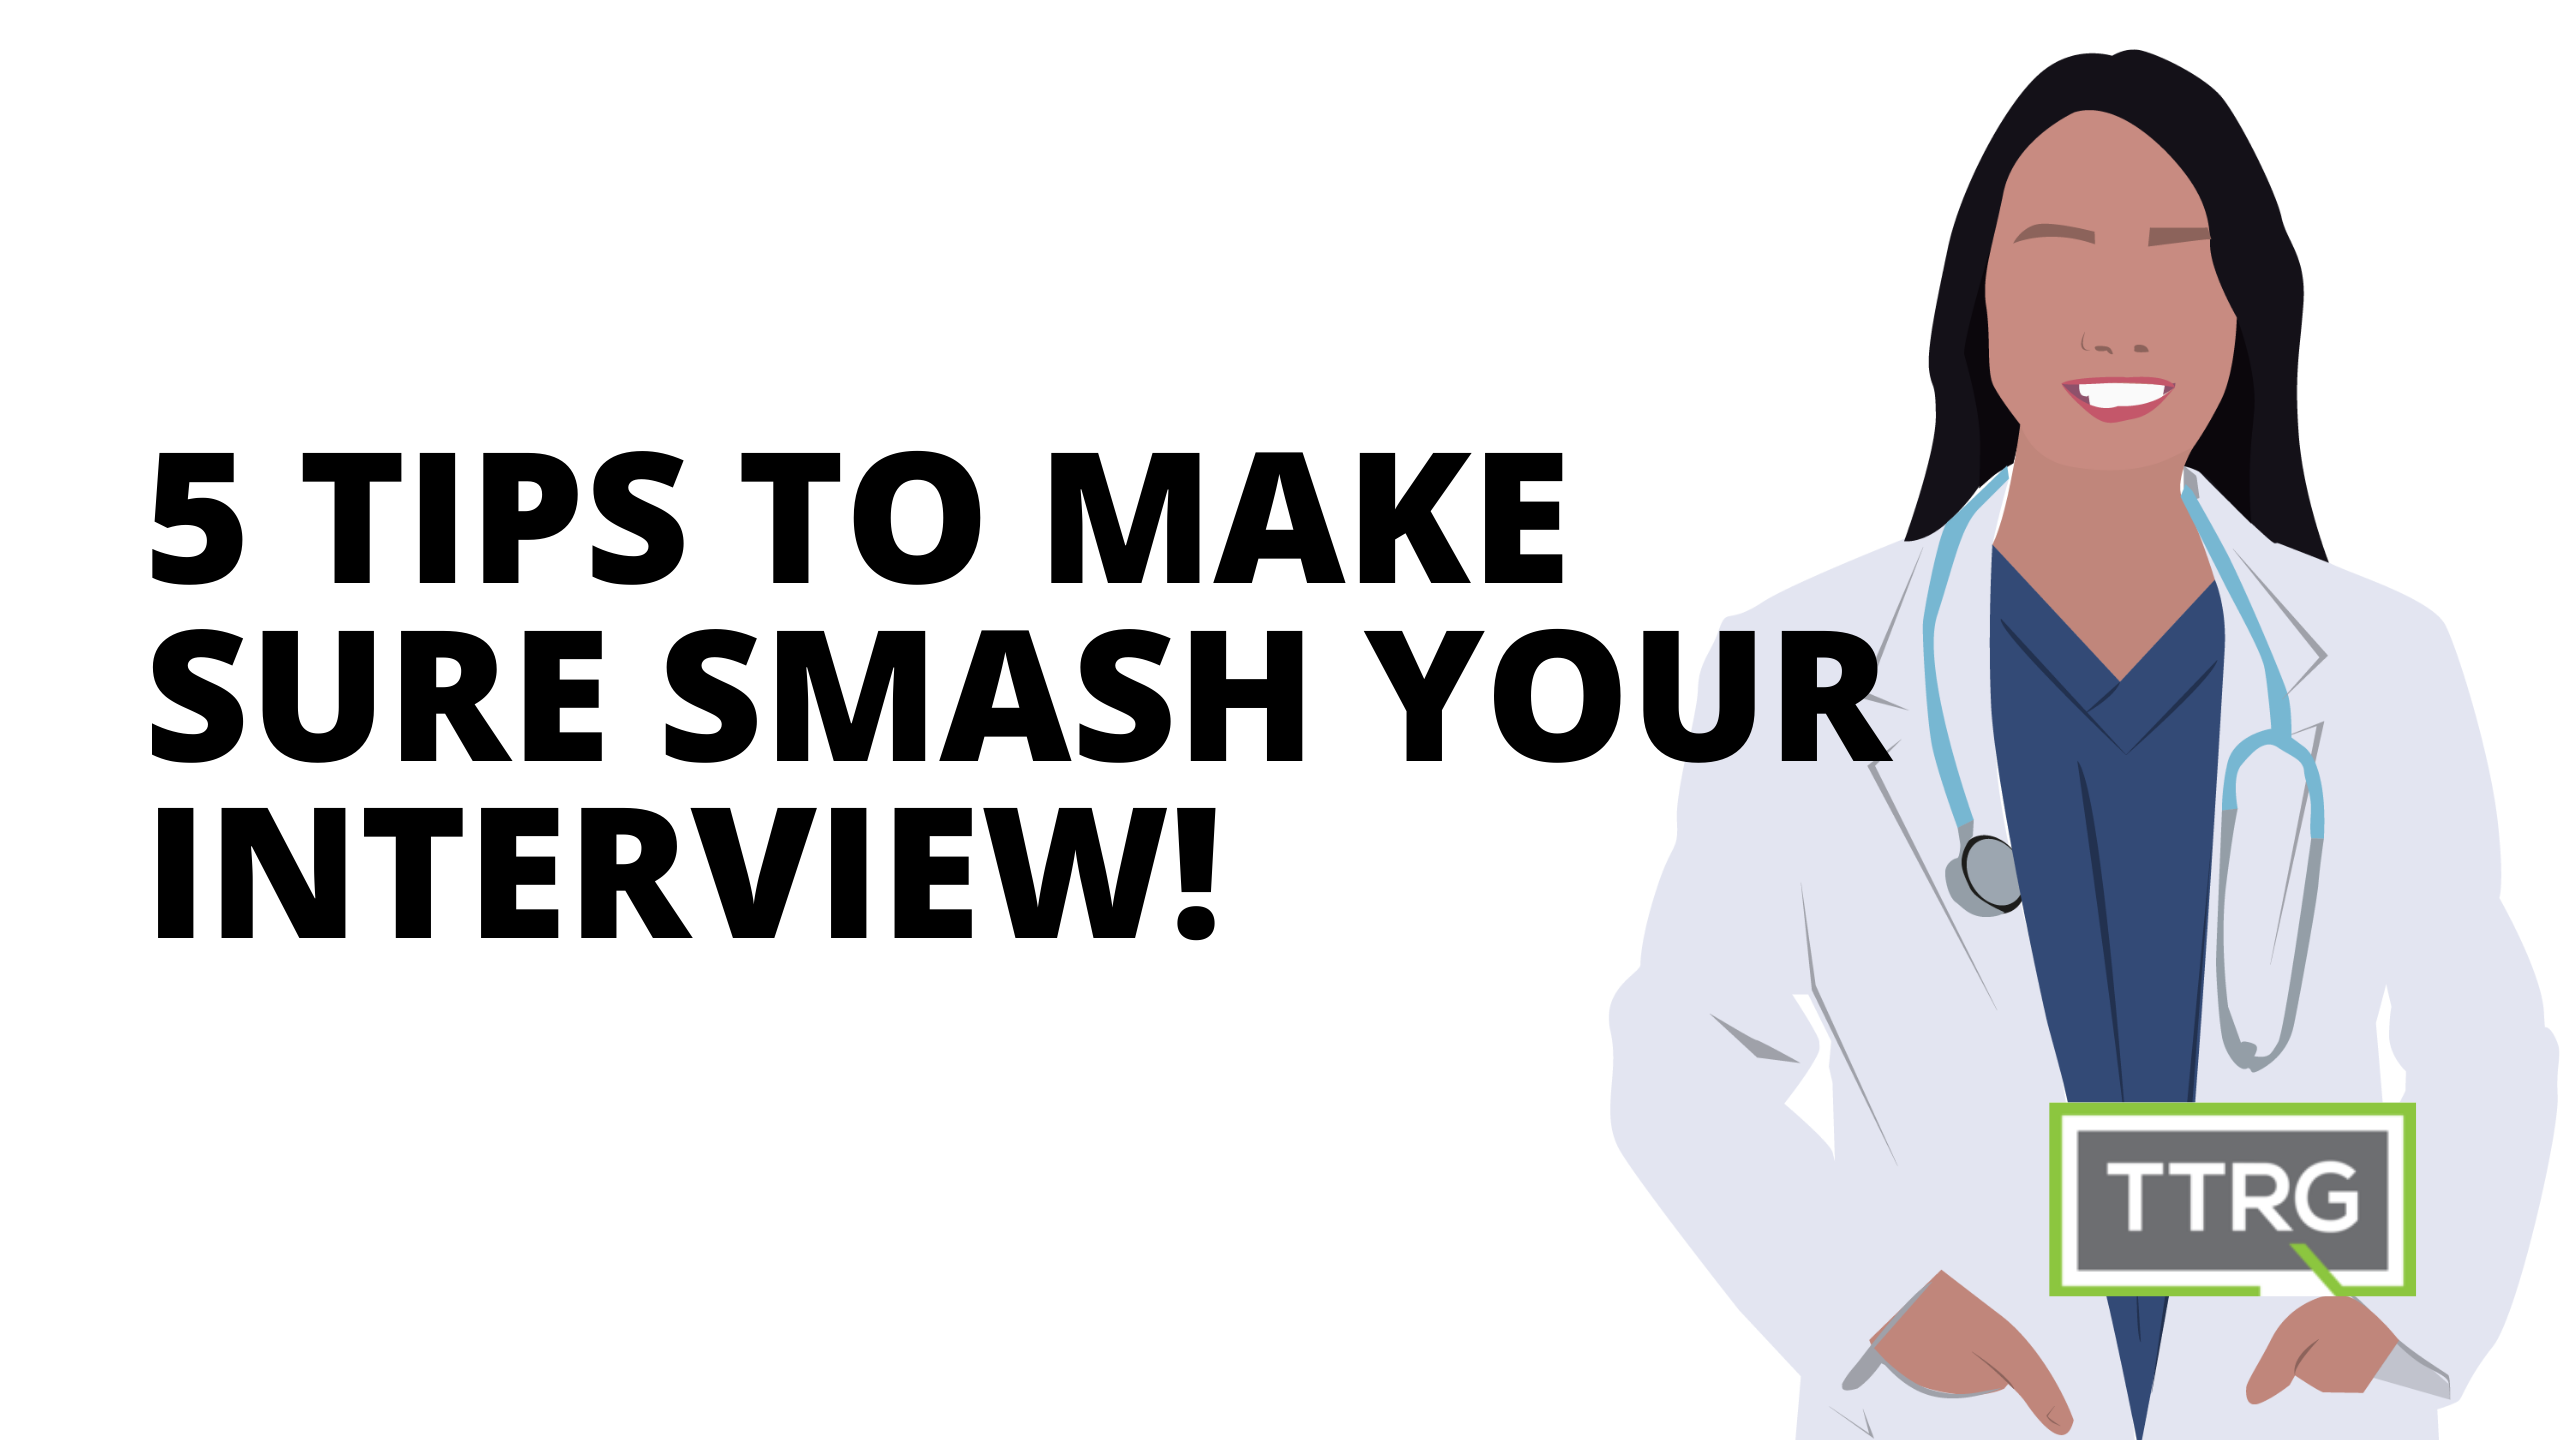 5 Tips to make sure smash your interview!